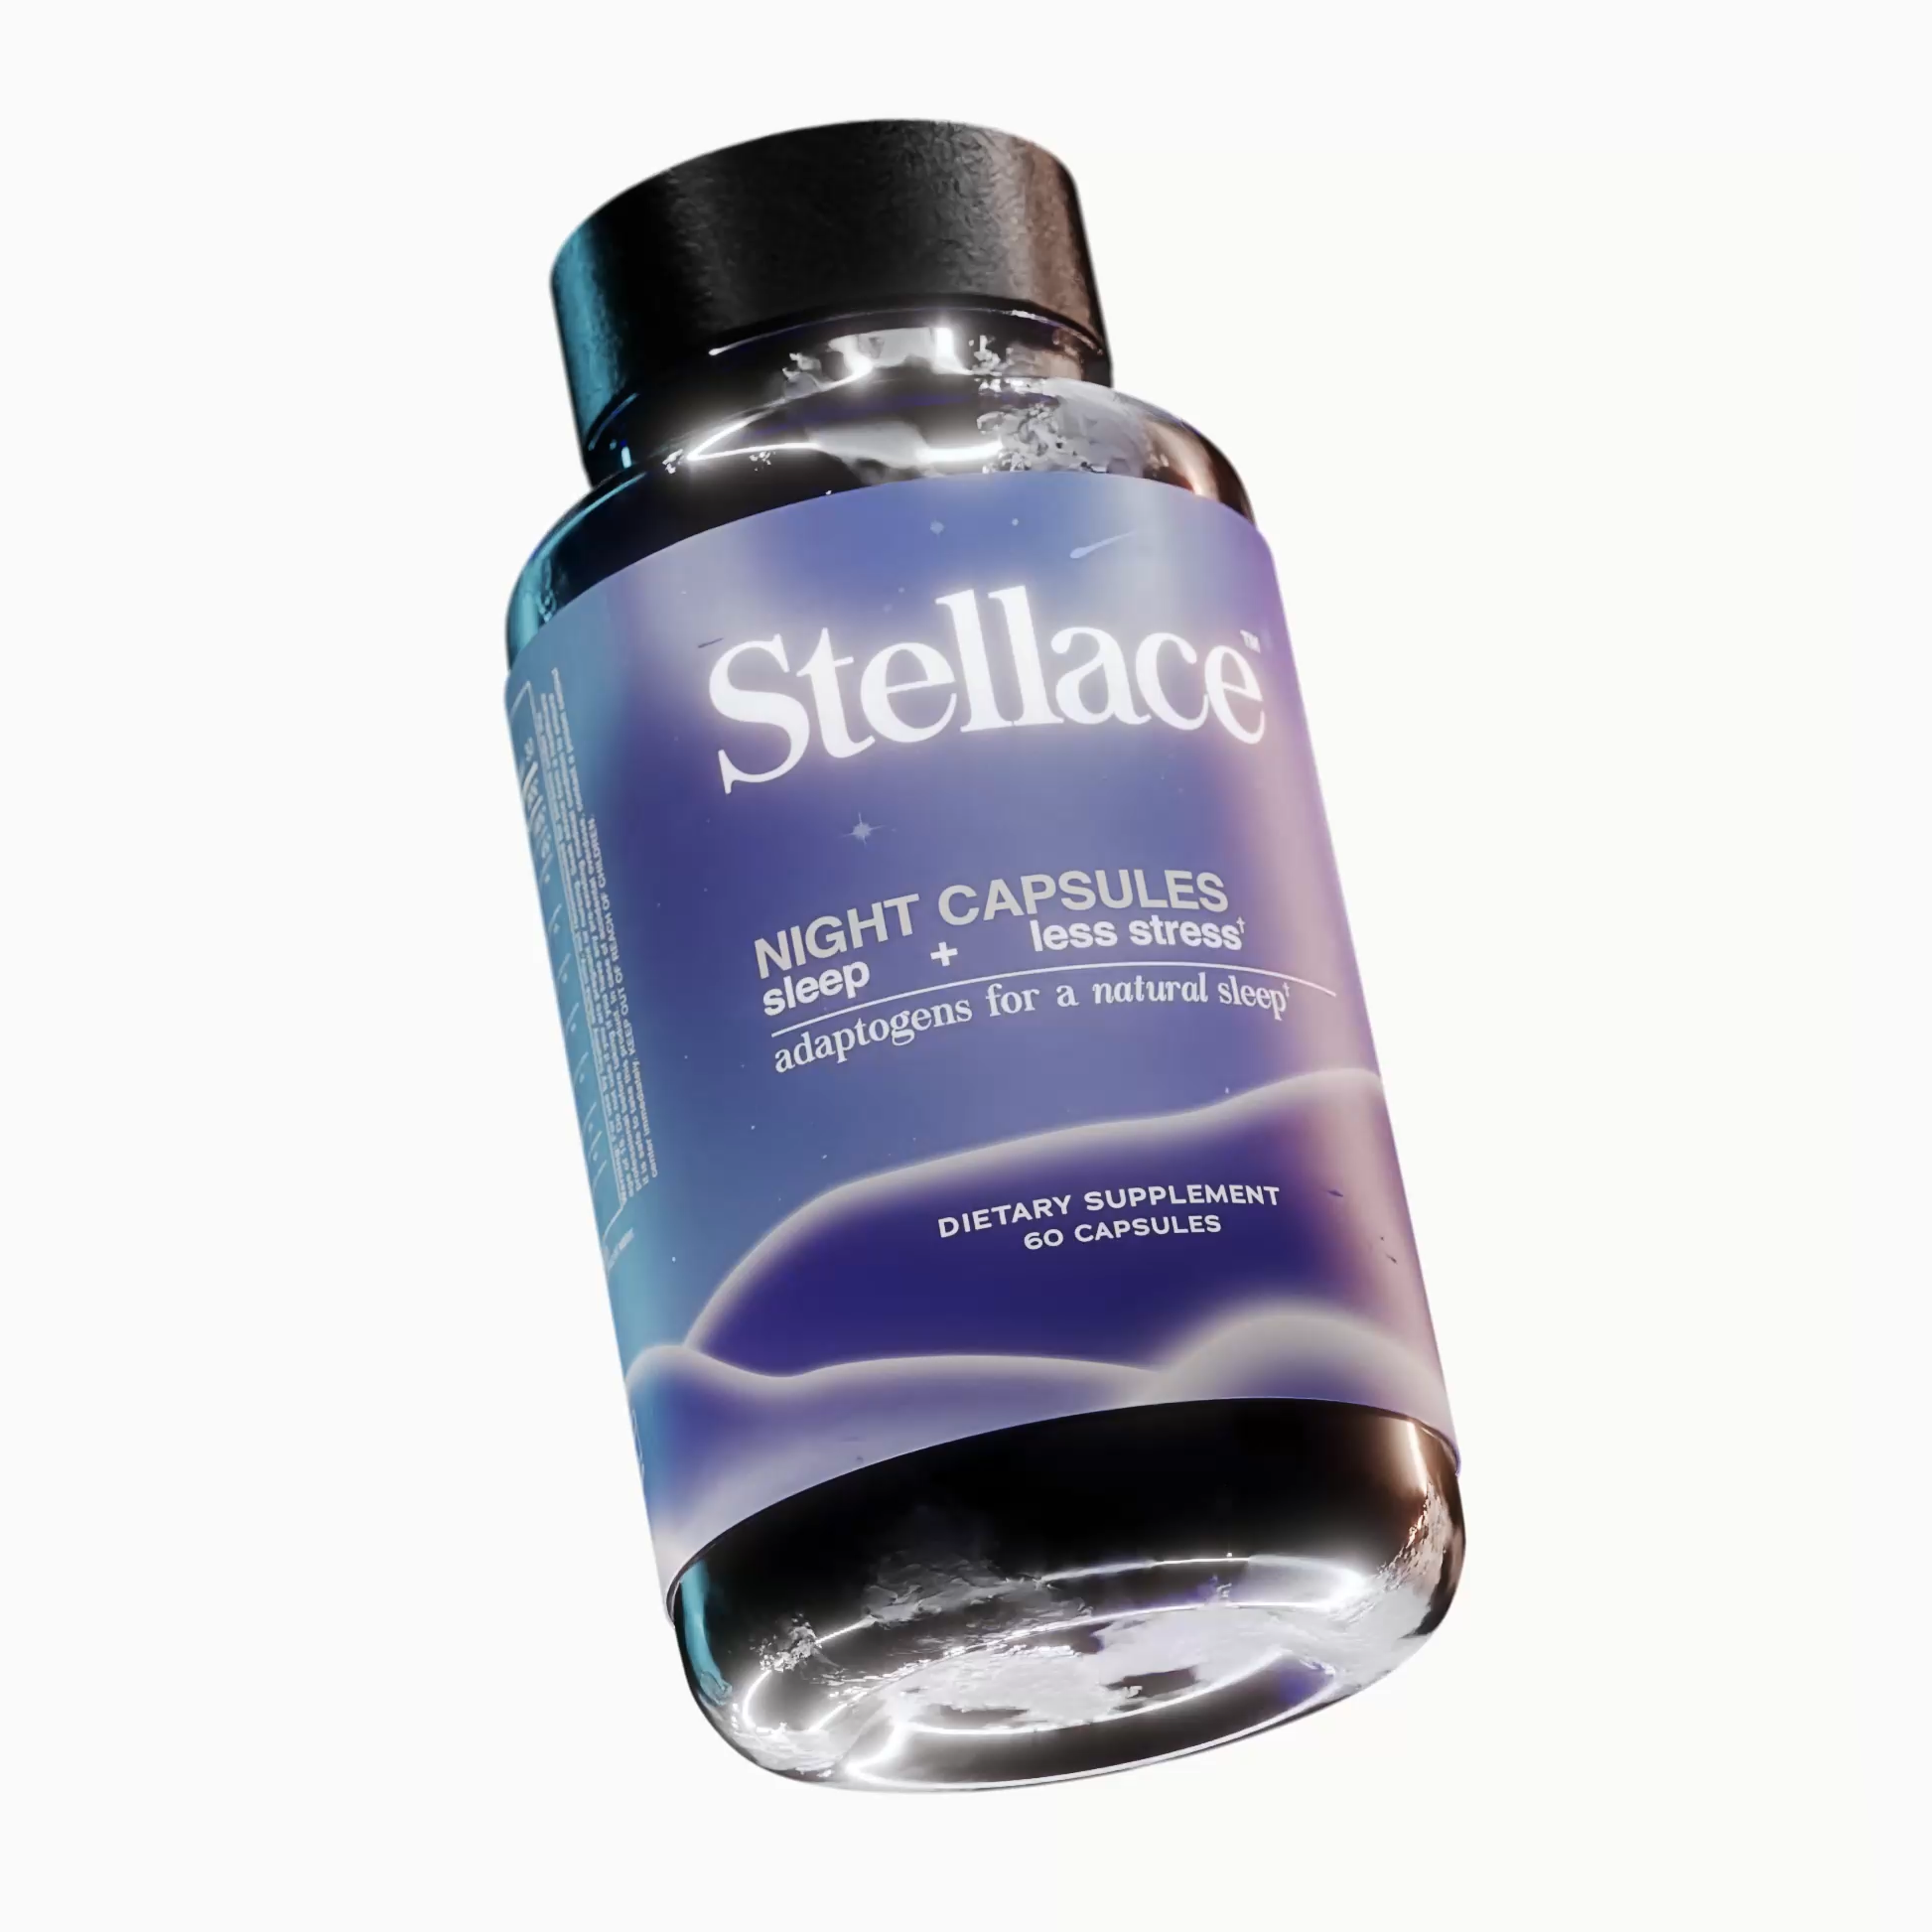 Bottle of Stellace night capsules dietary supplement for sleep.